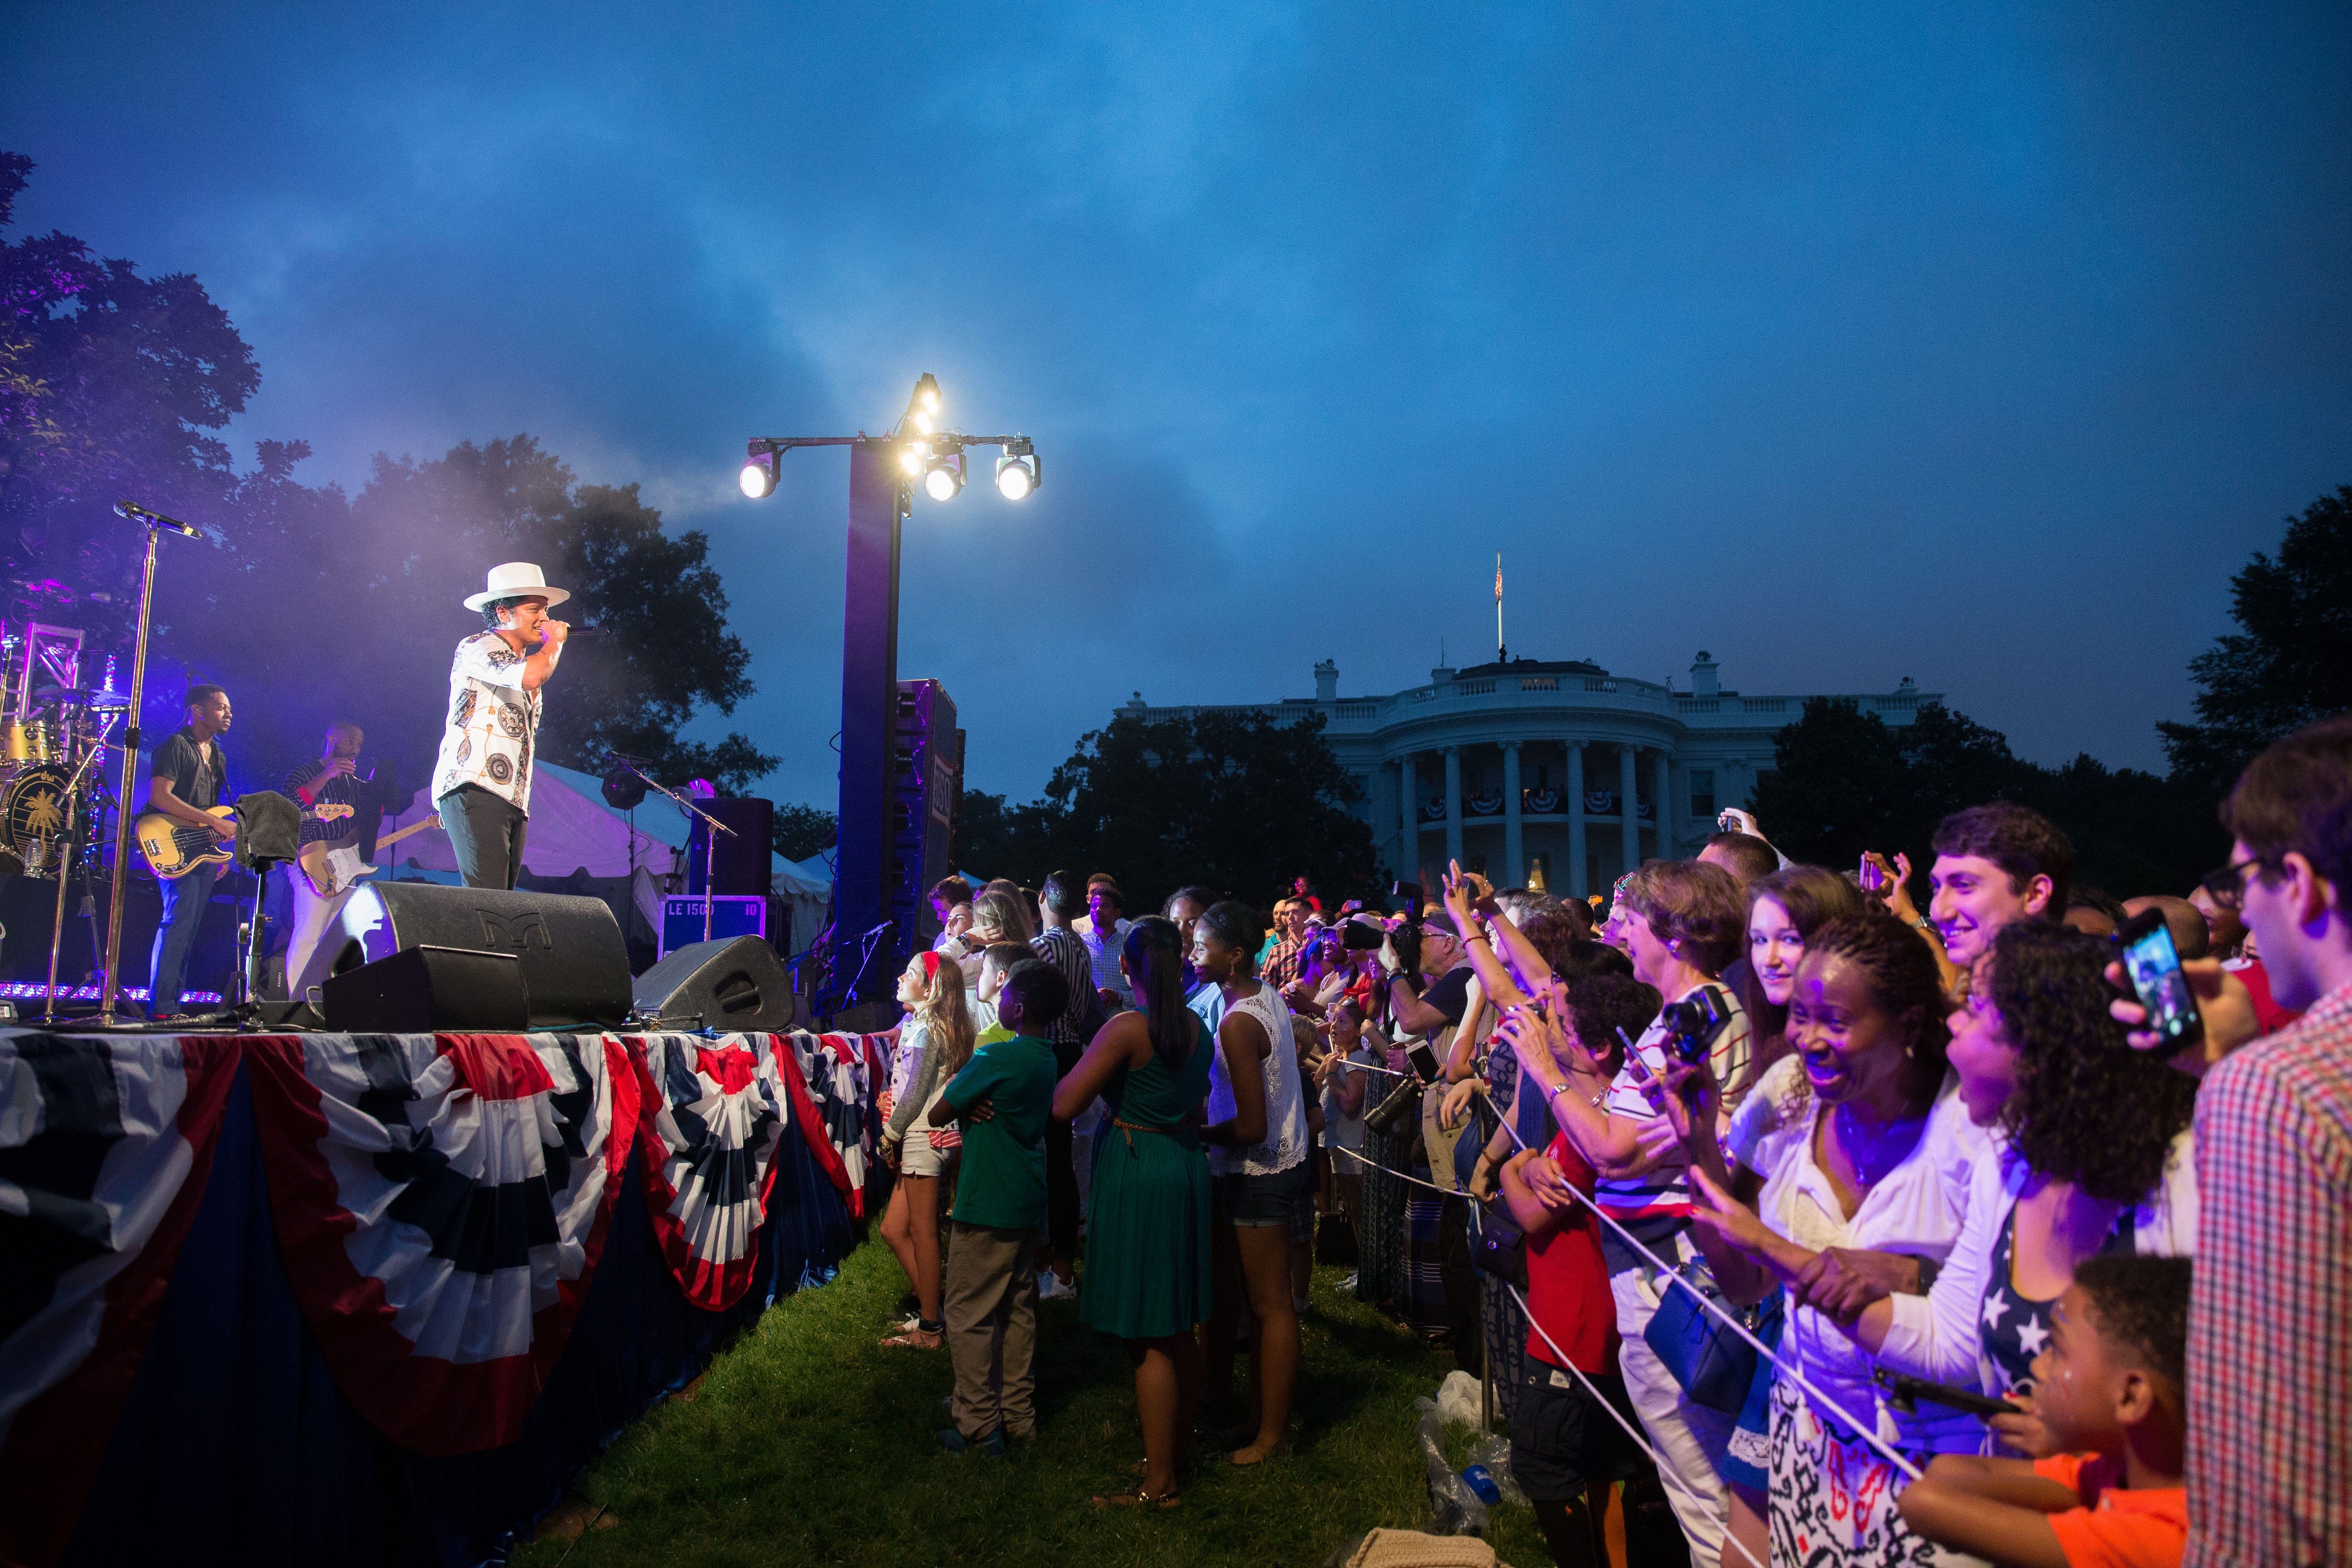 Obama brought Kendrick Lamar to the White House for the 4th of July